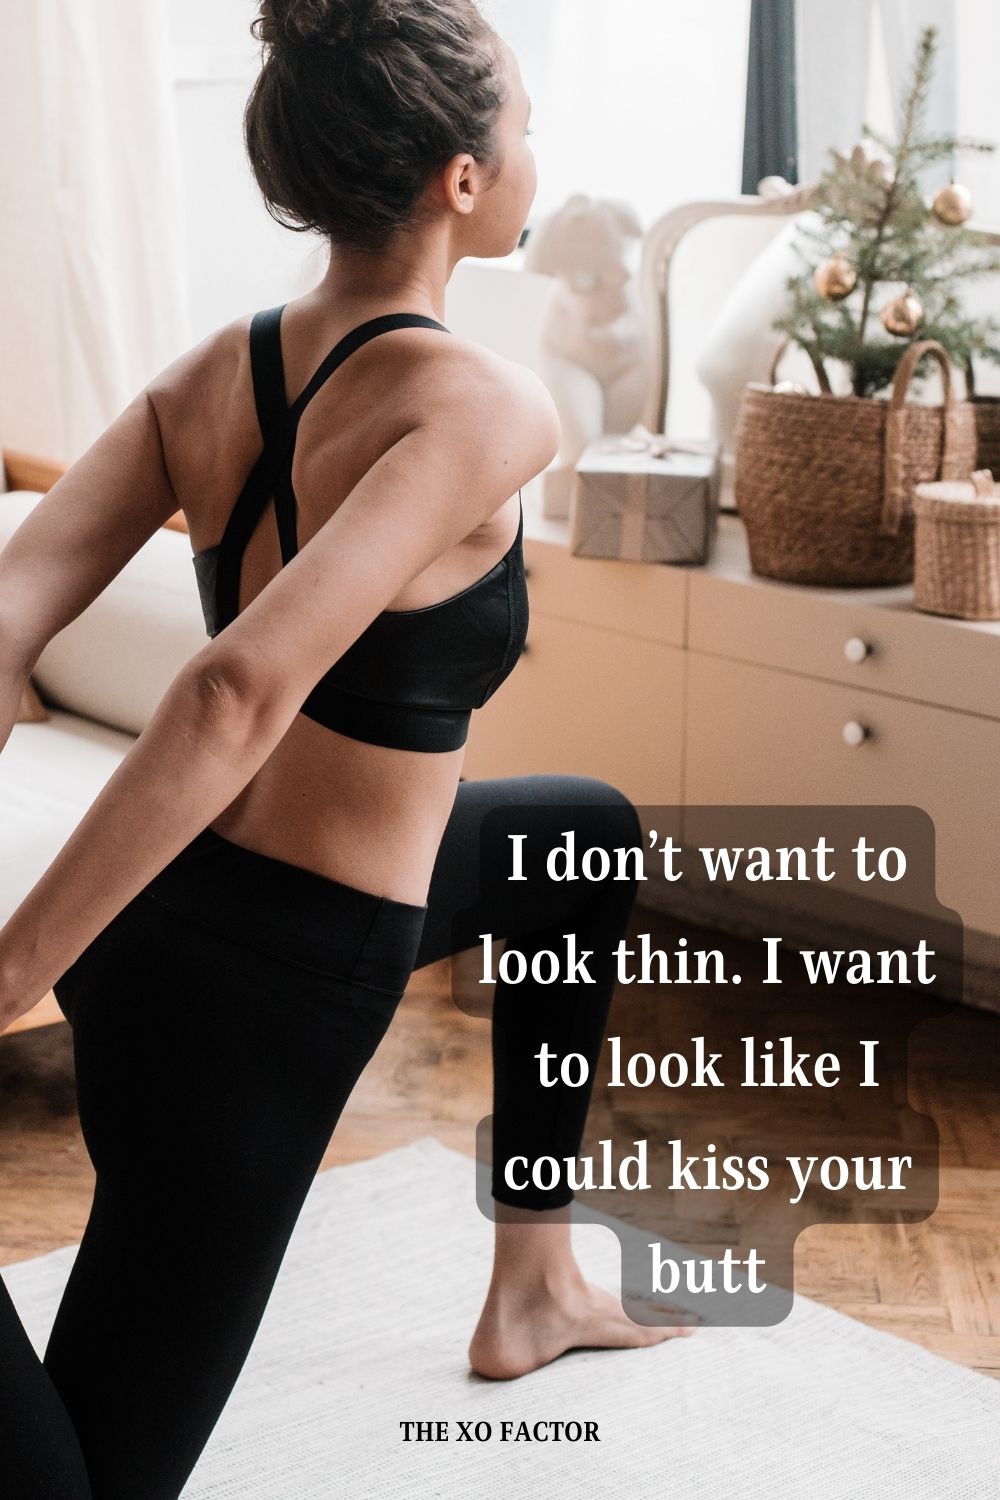 I don’t want to look thin. I want to look like I could kiss your butt